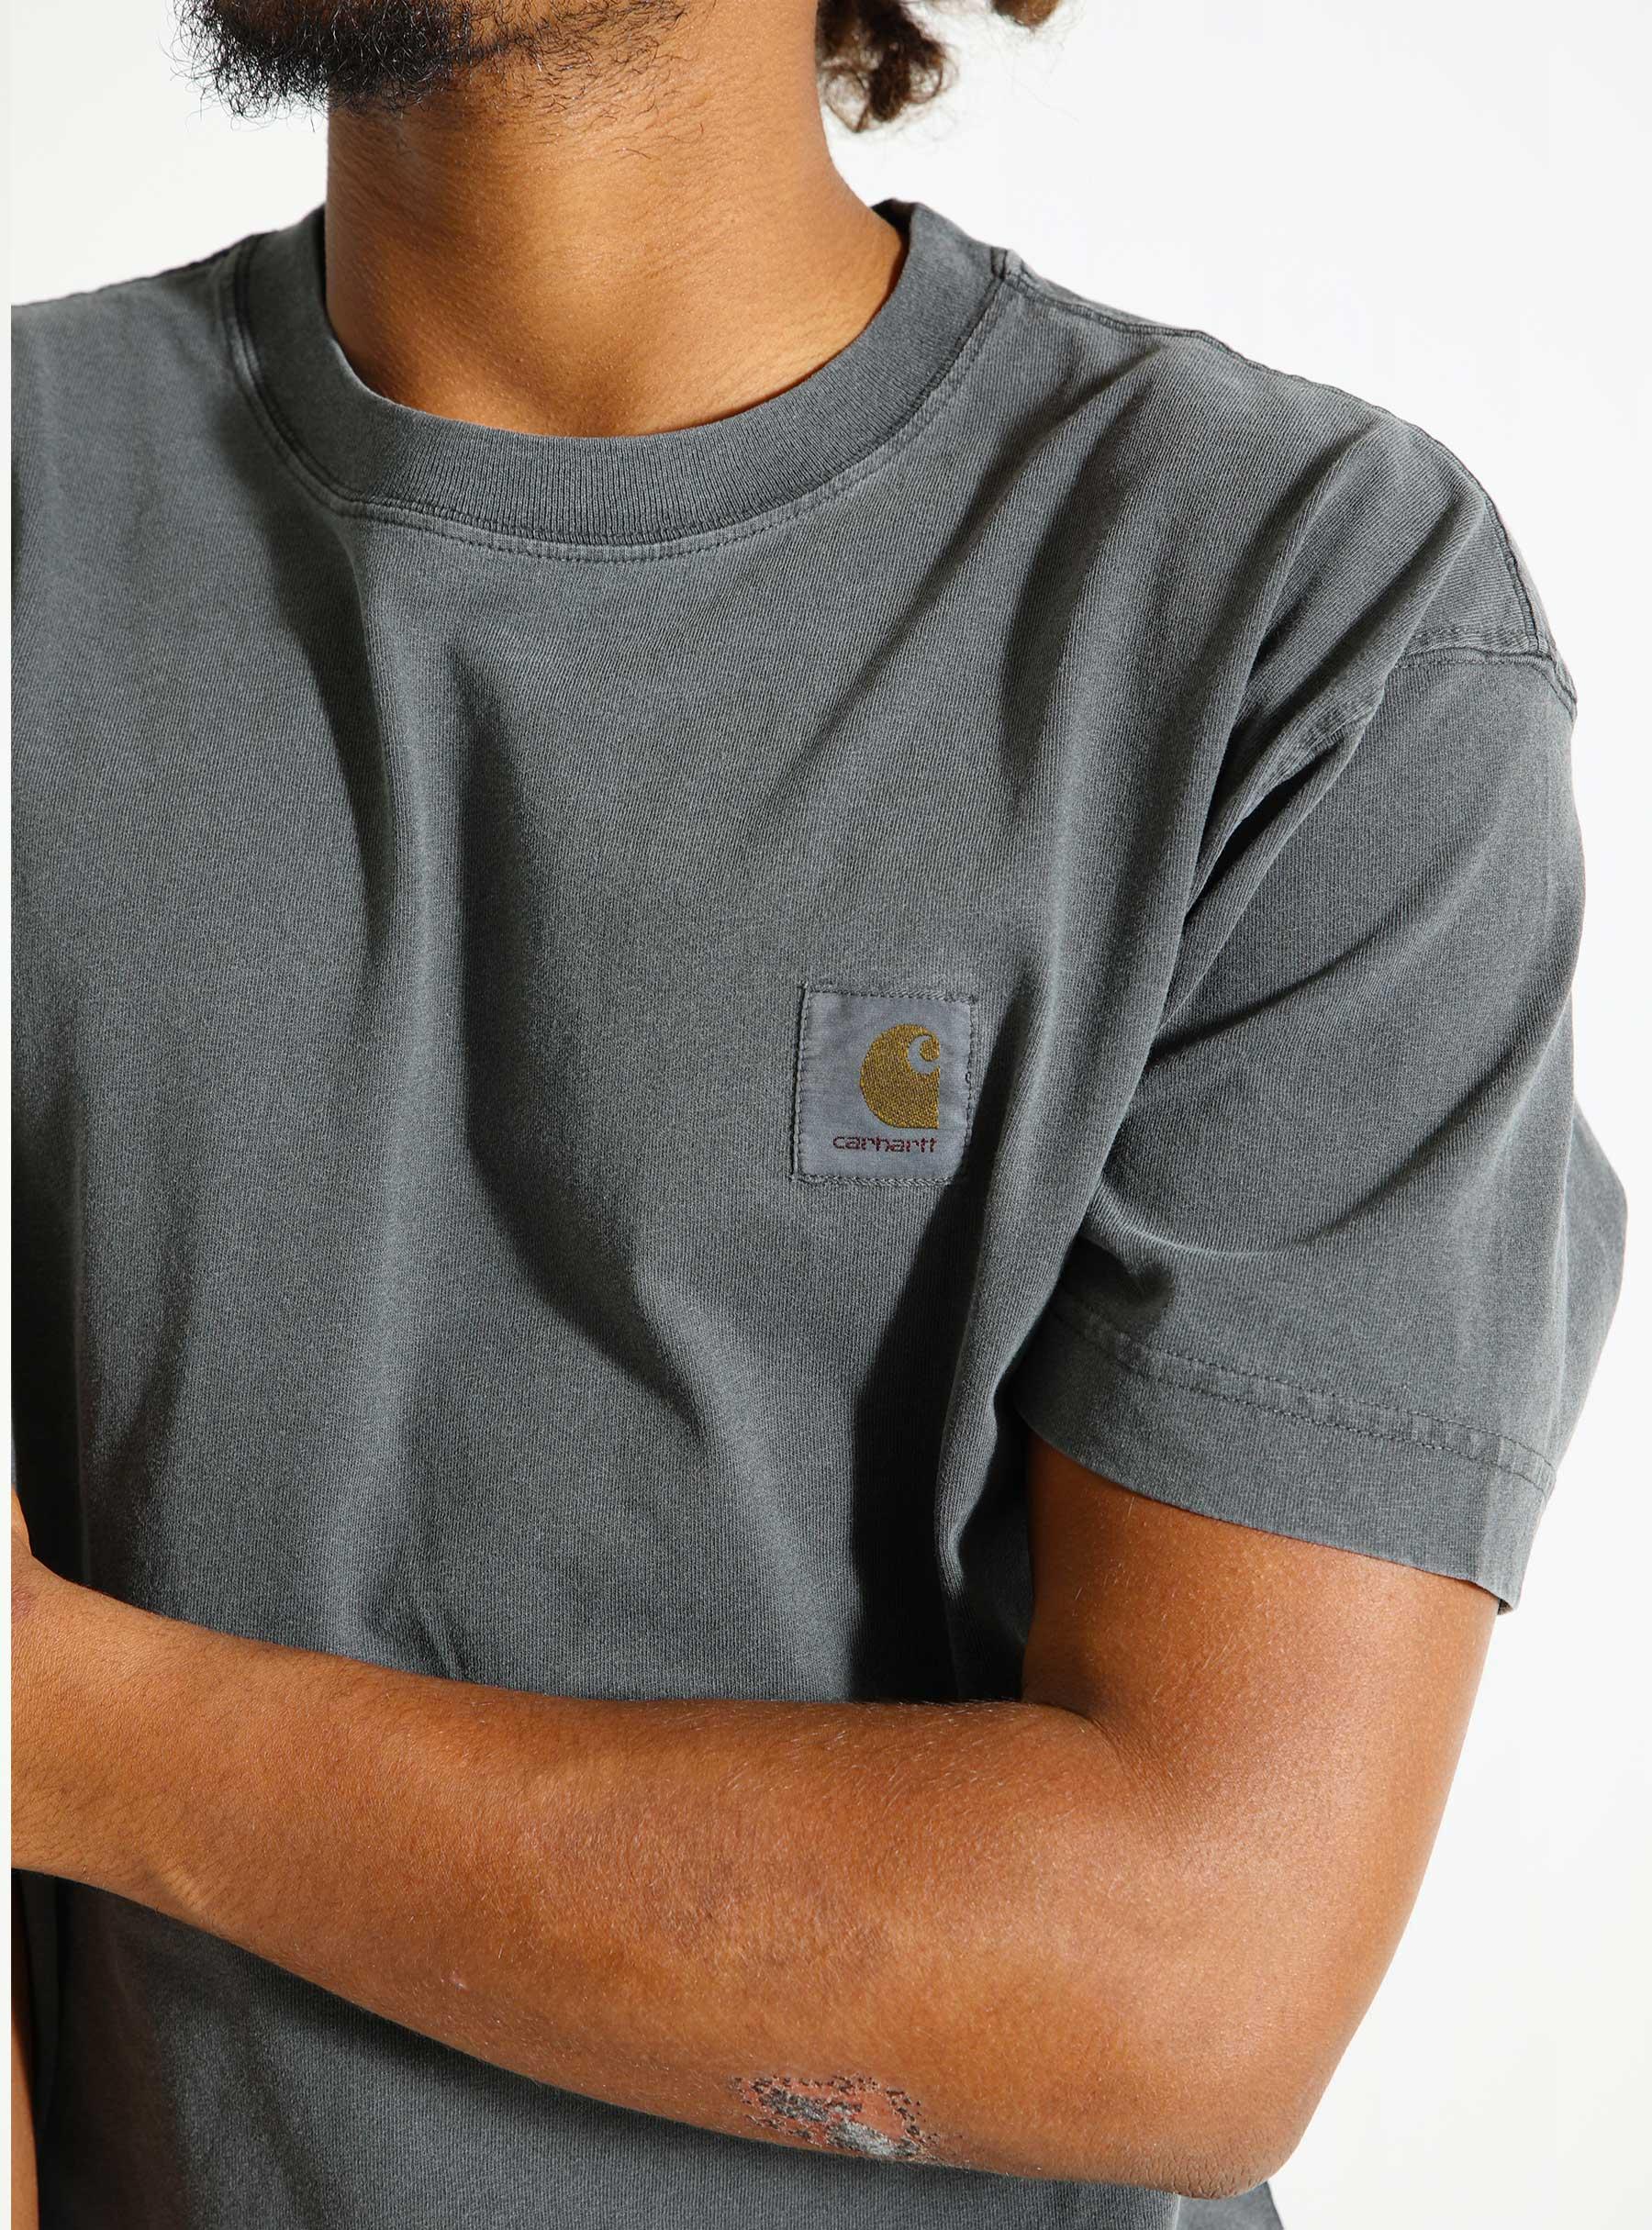 Nelson T-Shirt Charcoal Garment Dyed I029949-98GD